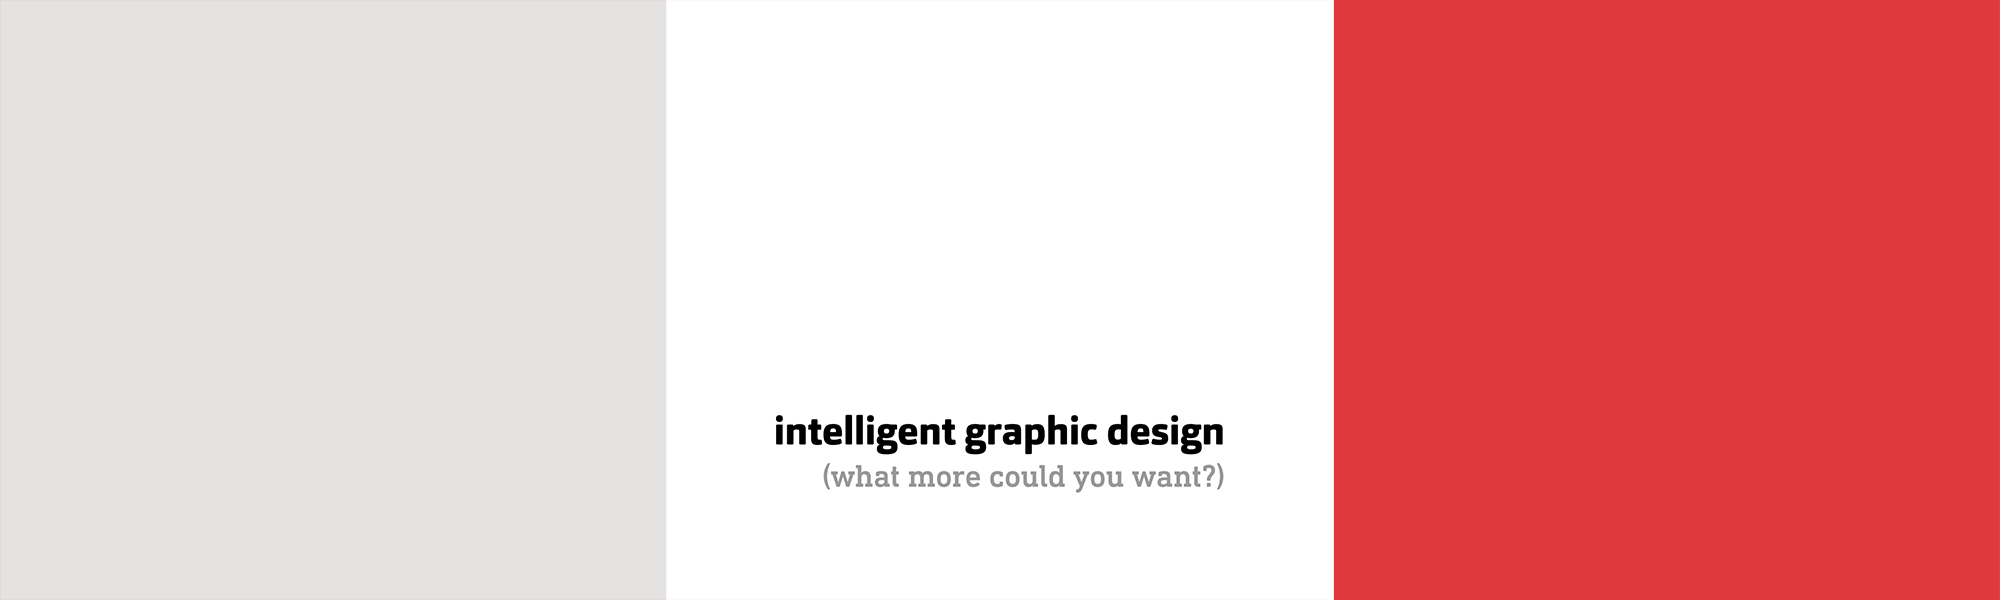 intelligent graphic design (what more could you want?)